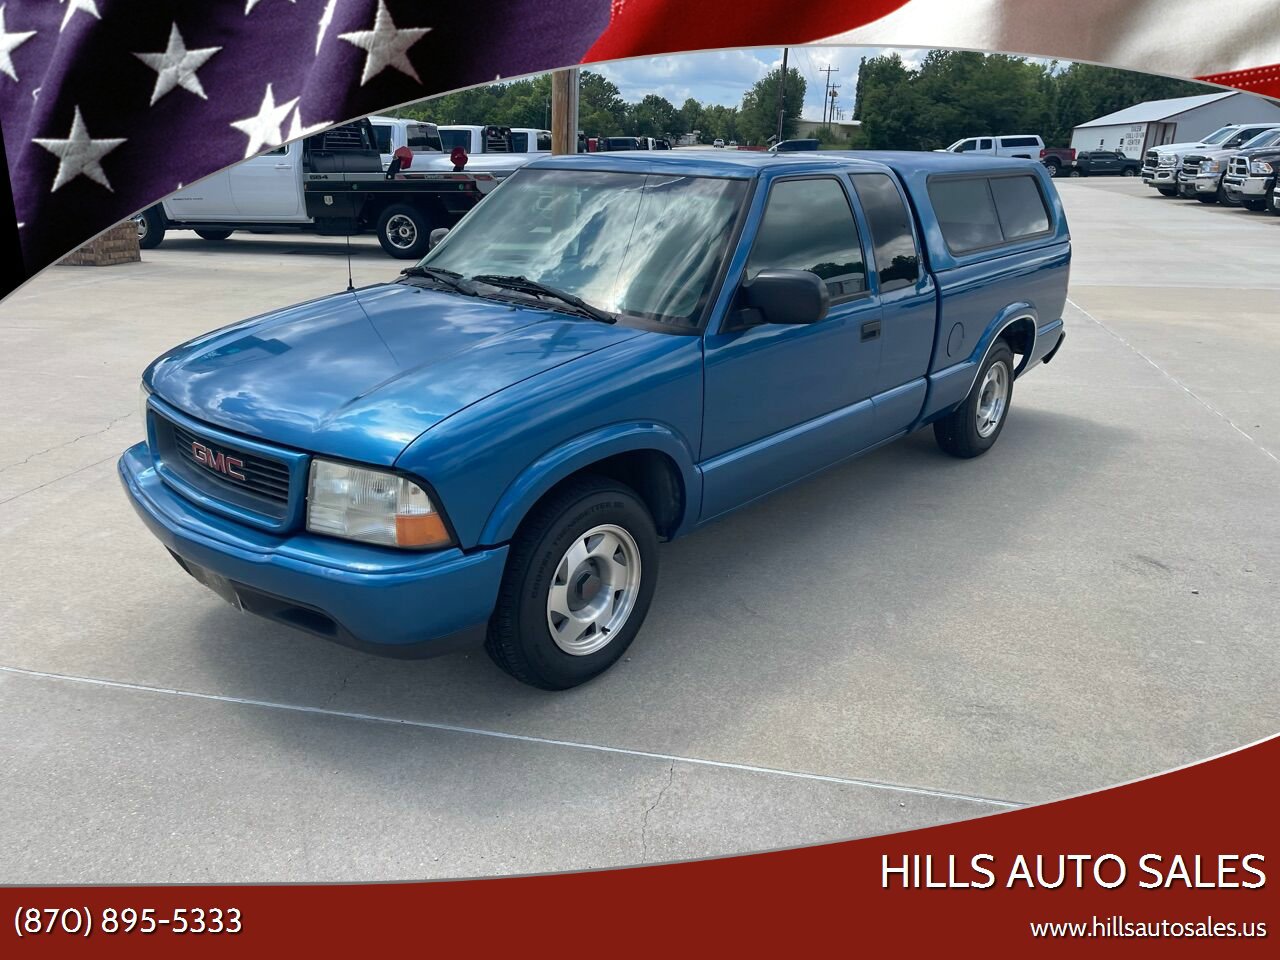 Used 2000 GMC Sonoma for Sale Right Now - Autotrader